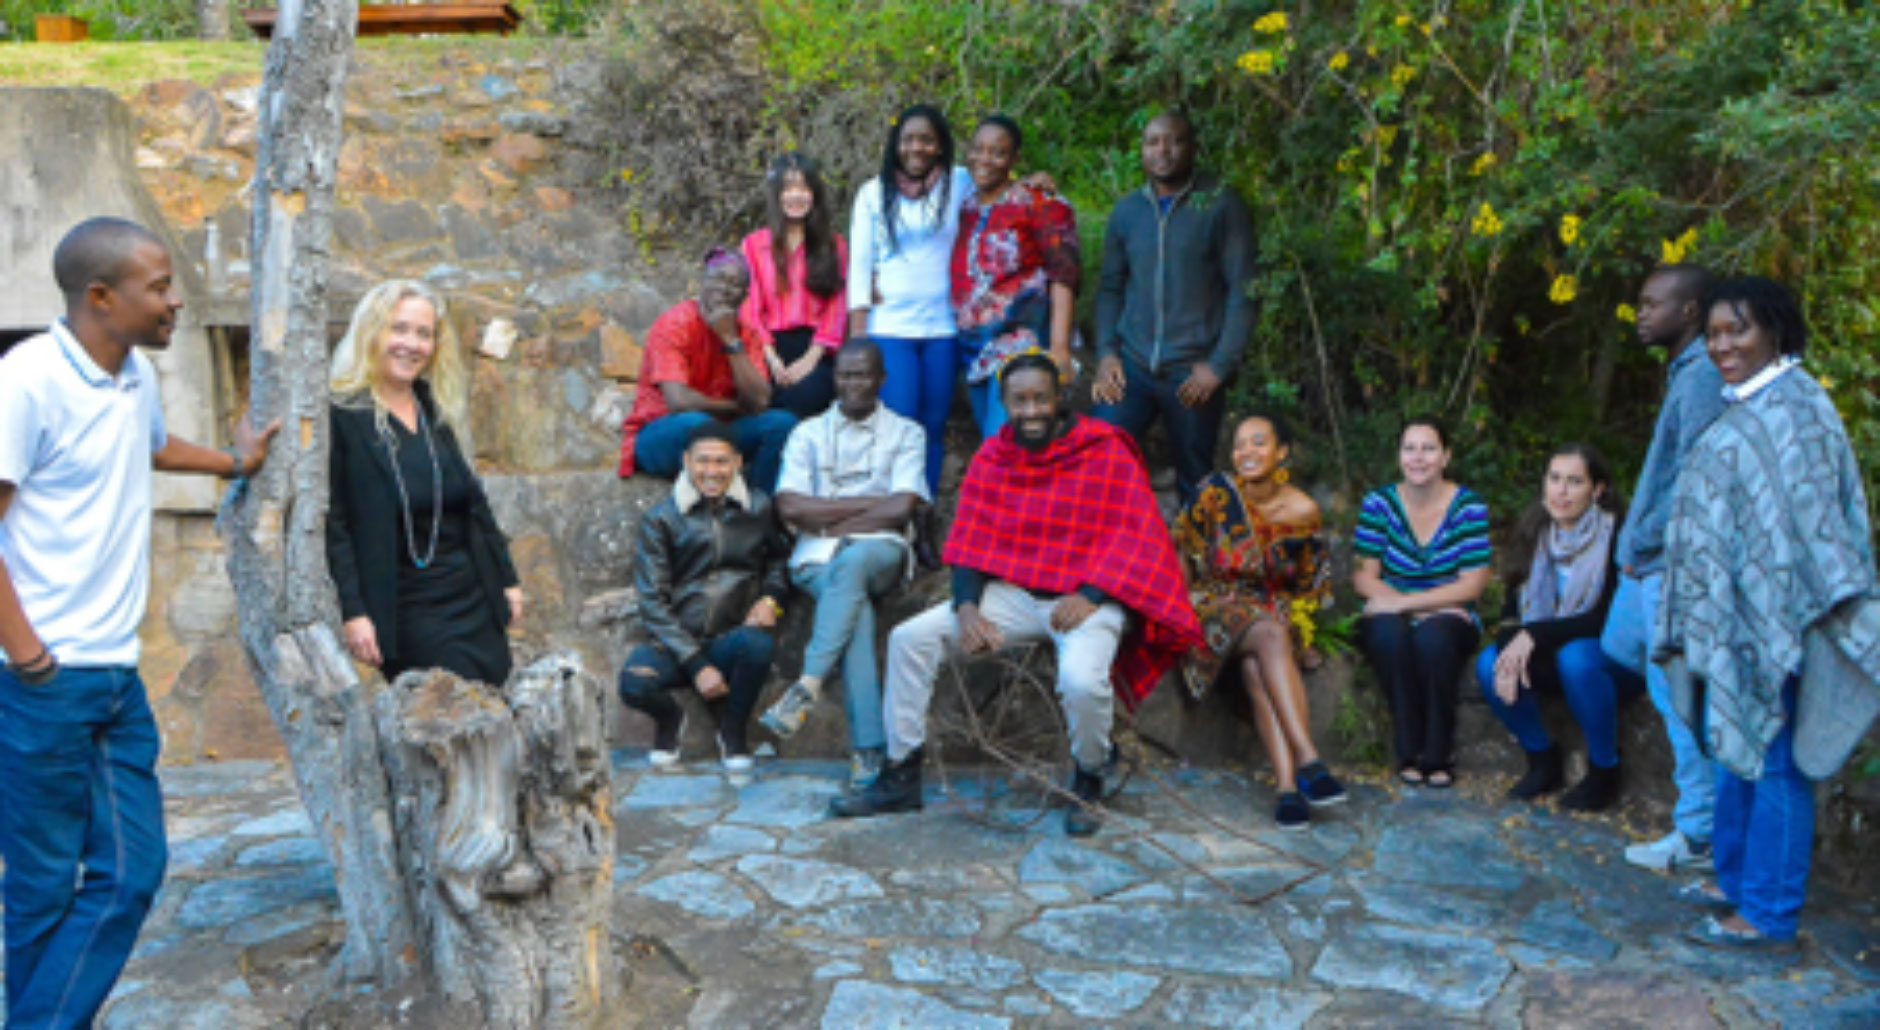 Members of the 2018 Arts of Africa and Global Souths research team. Photo by team member Stary Mwaba